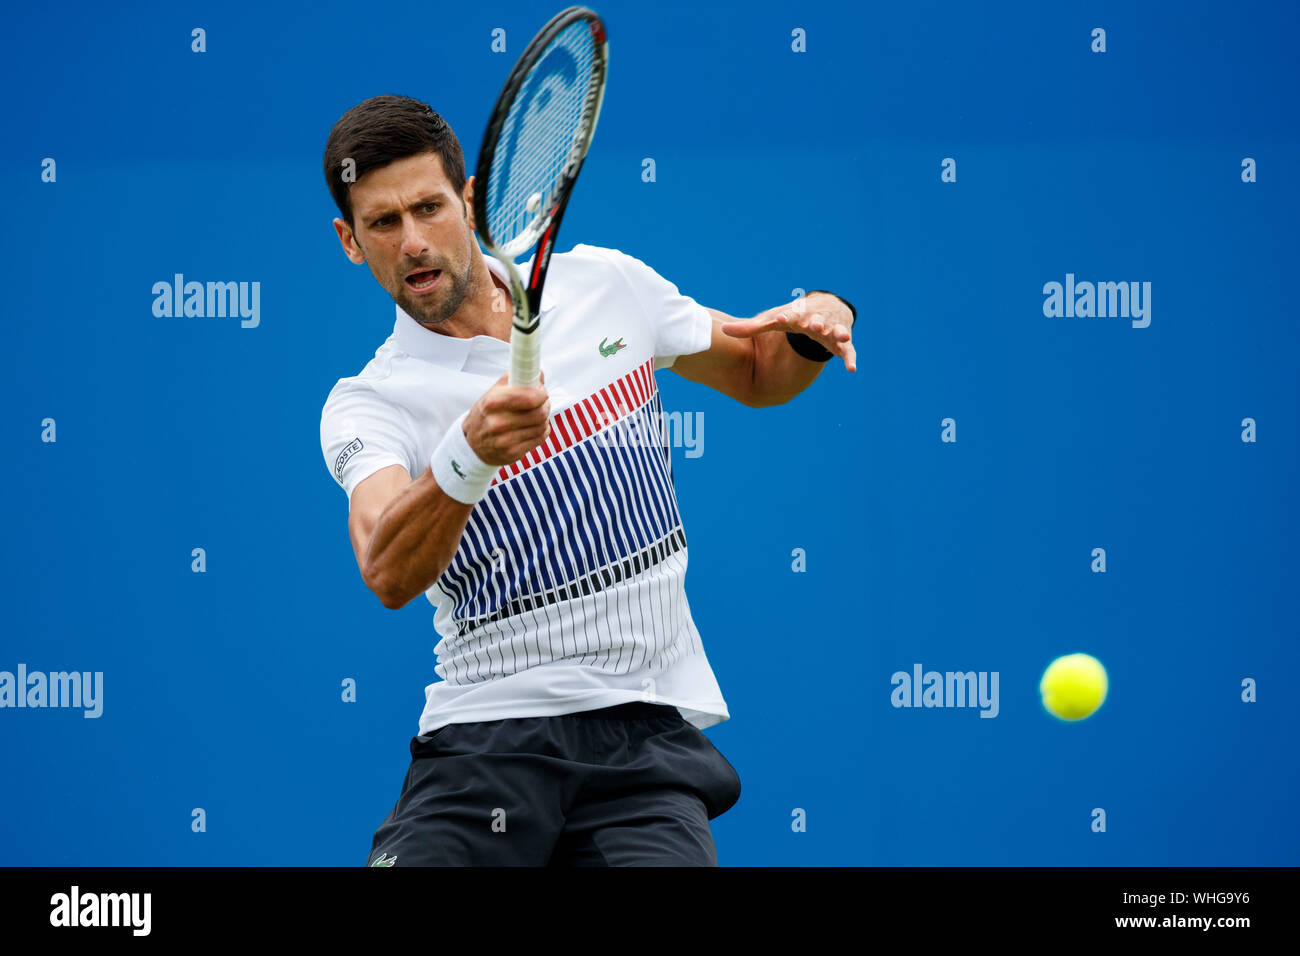 Novak Djokovic of Serbia in action playing single handed forehand against Daniil Medvedev of Russia. Aegon International 2017- Eastbourne - England - Stock Photo